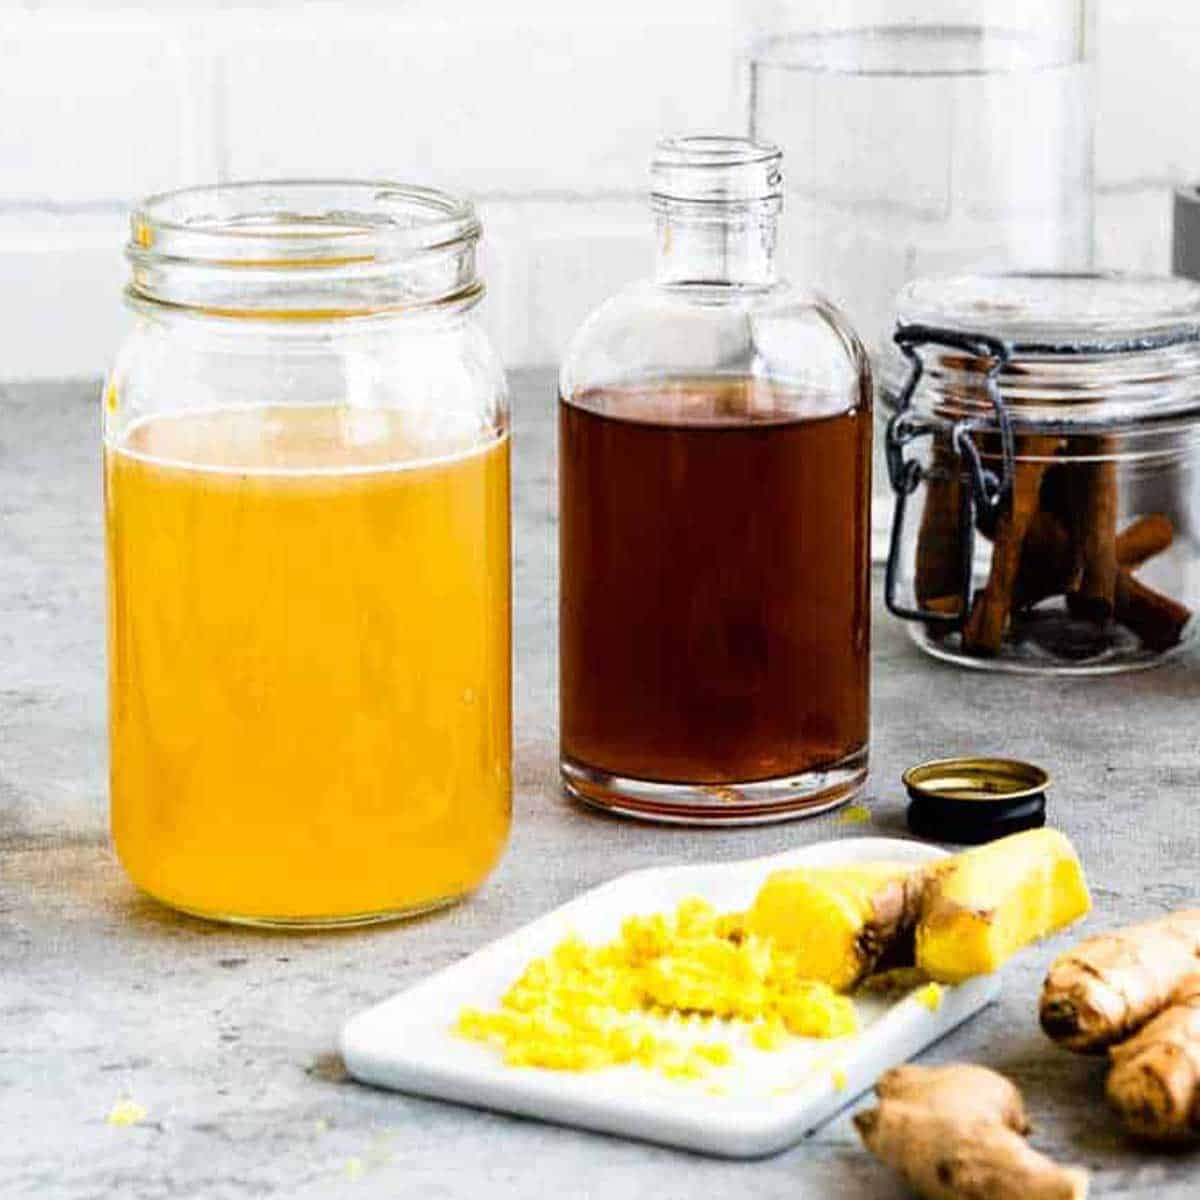 yellow colored tea and apple cider vinegar in glass jars with grated ginger in front on a plate.